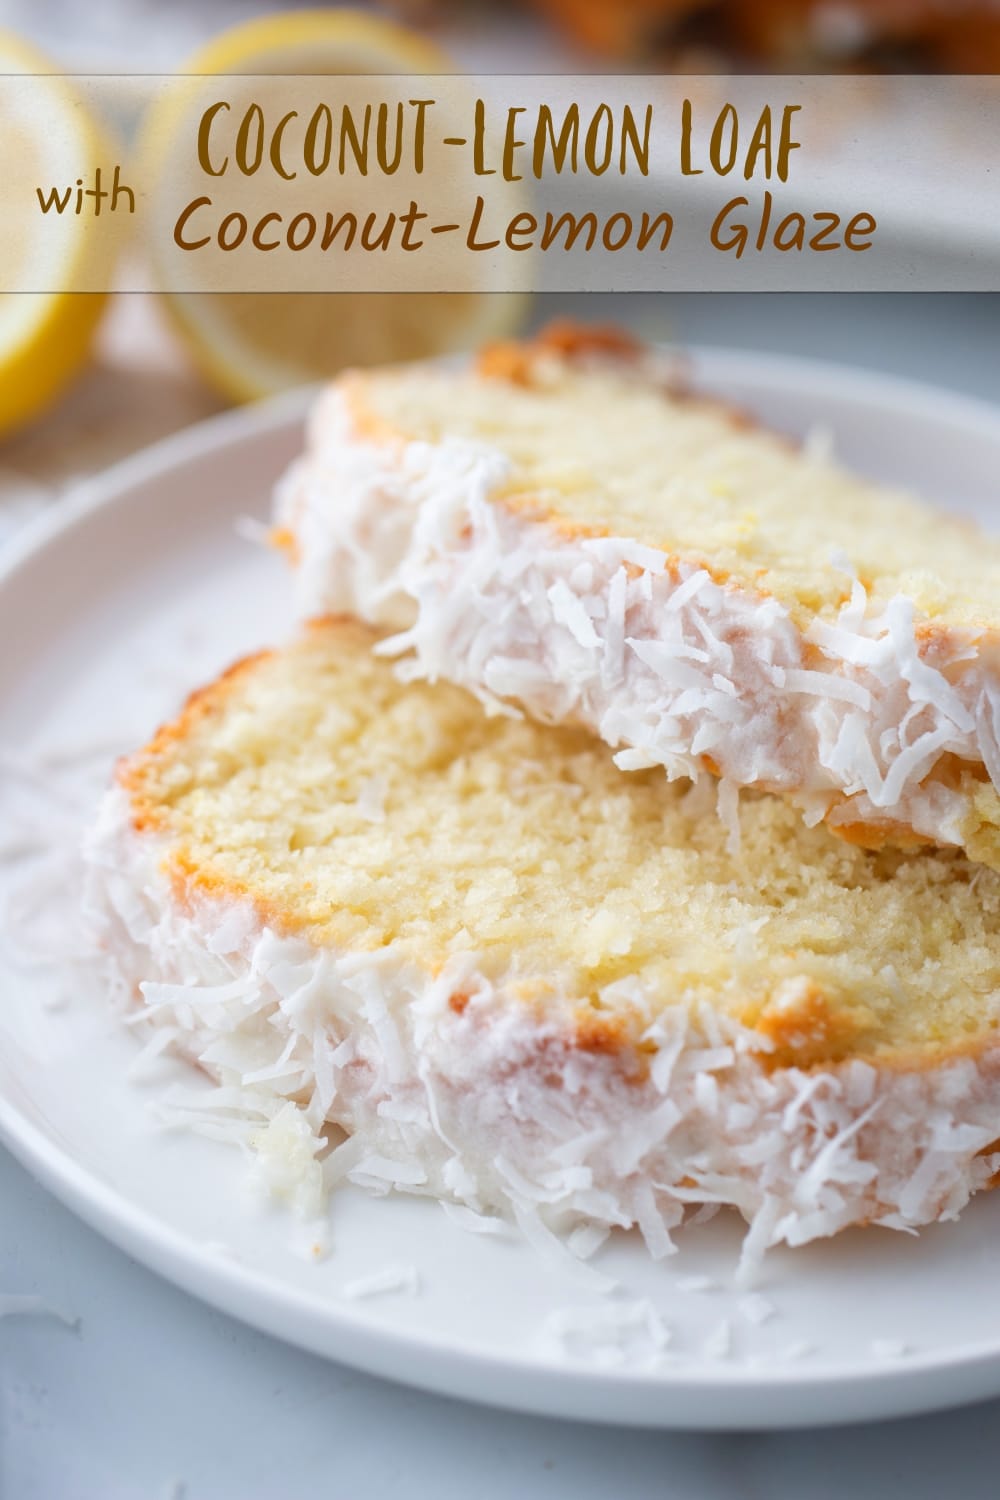 Coconut-Lemon Loaf with Coconut Lemon Glaze, an exceptionally moist, tender and delicate cake, bursting with lemon and coconut flavor. via @cmpollak1